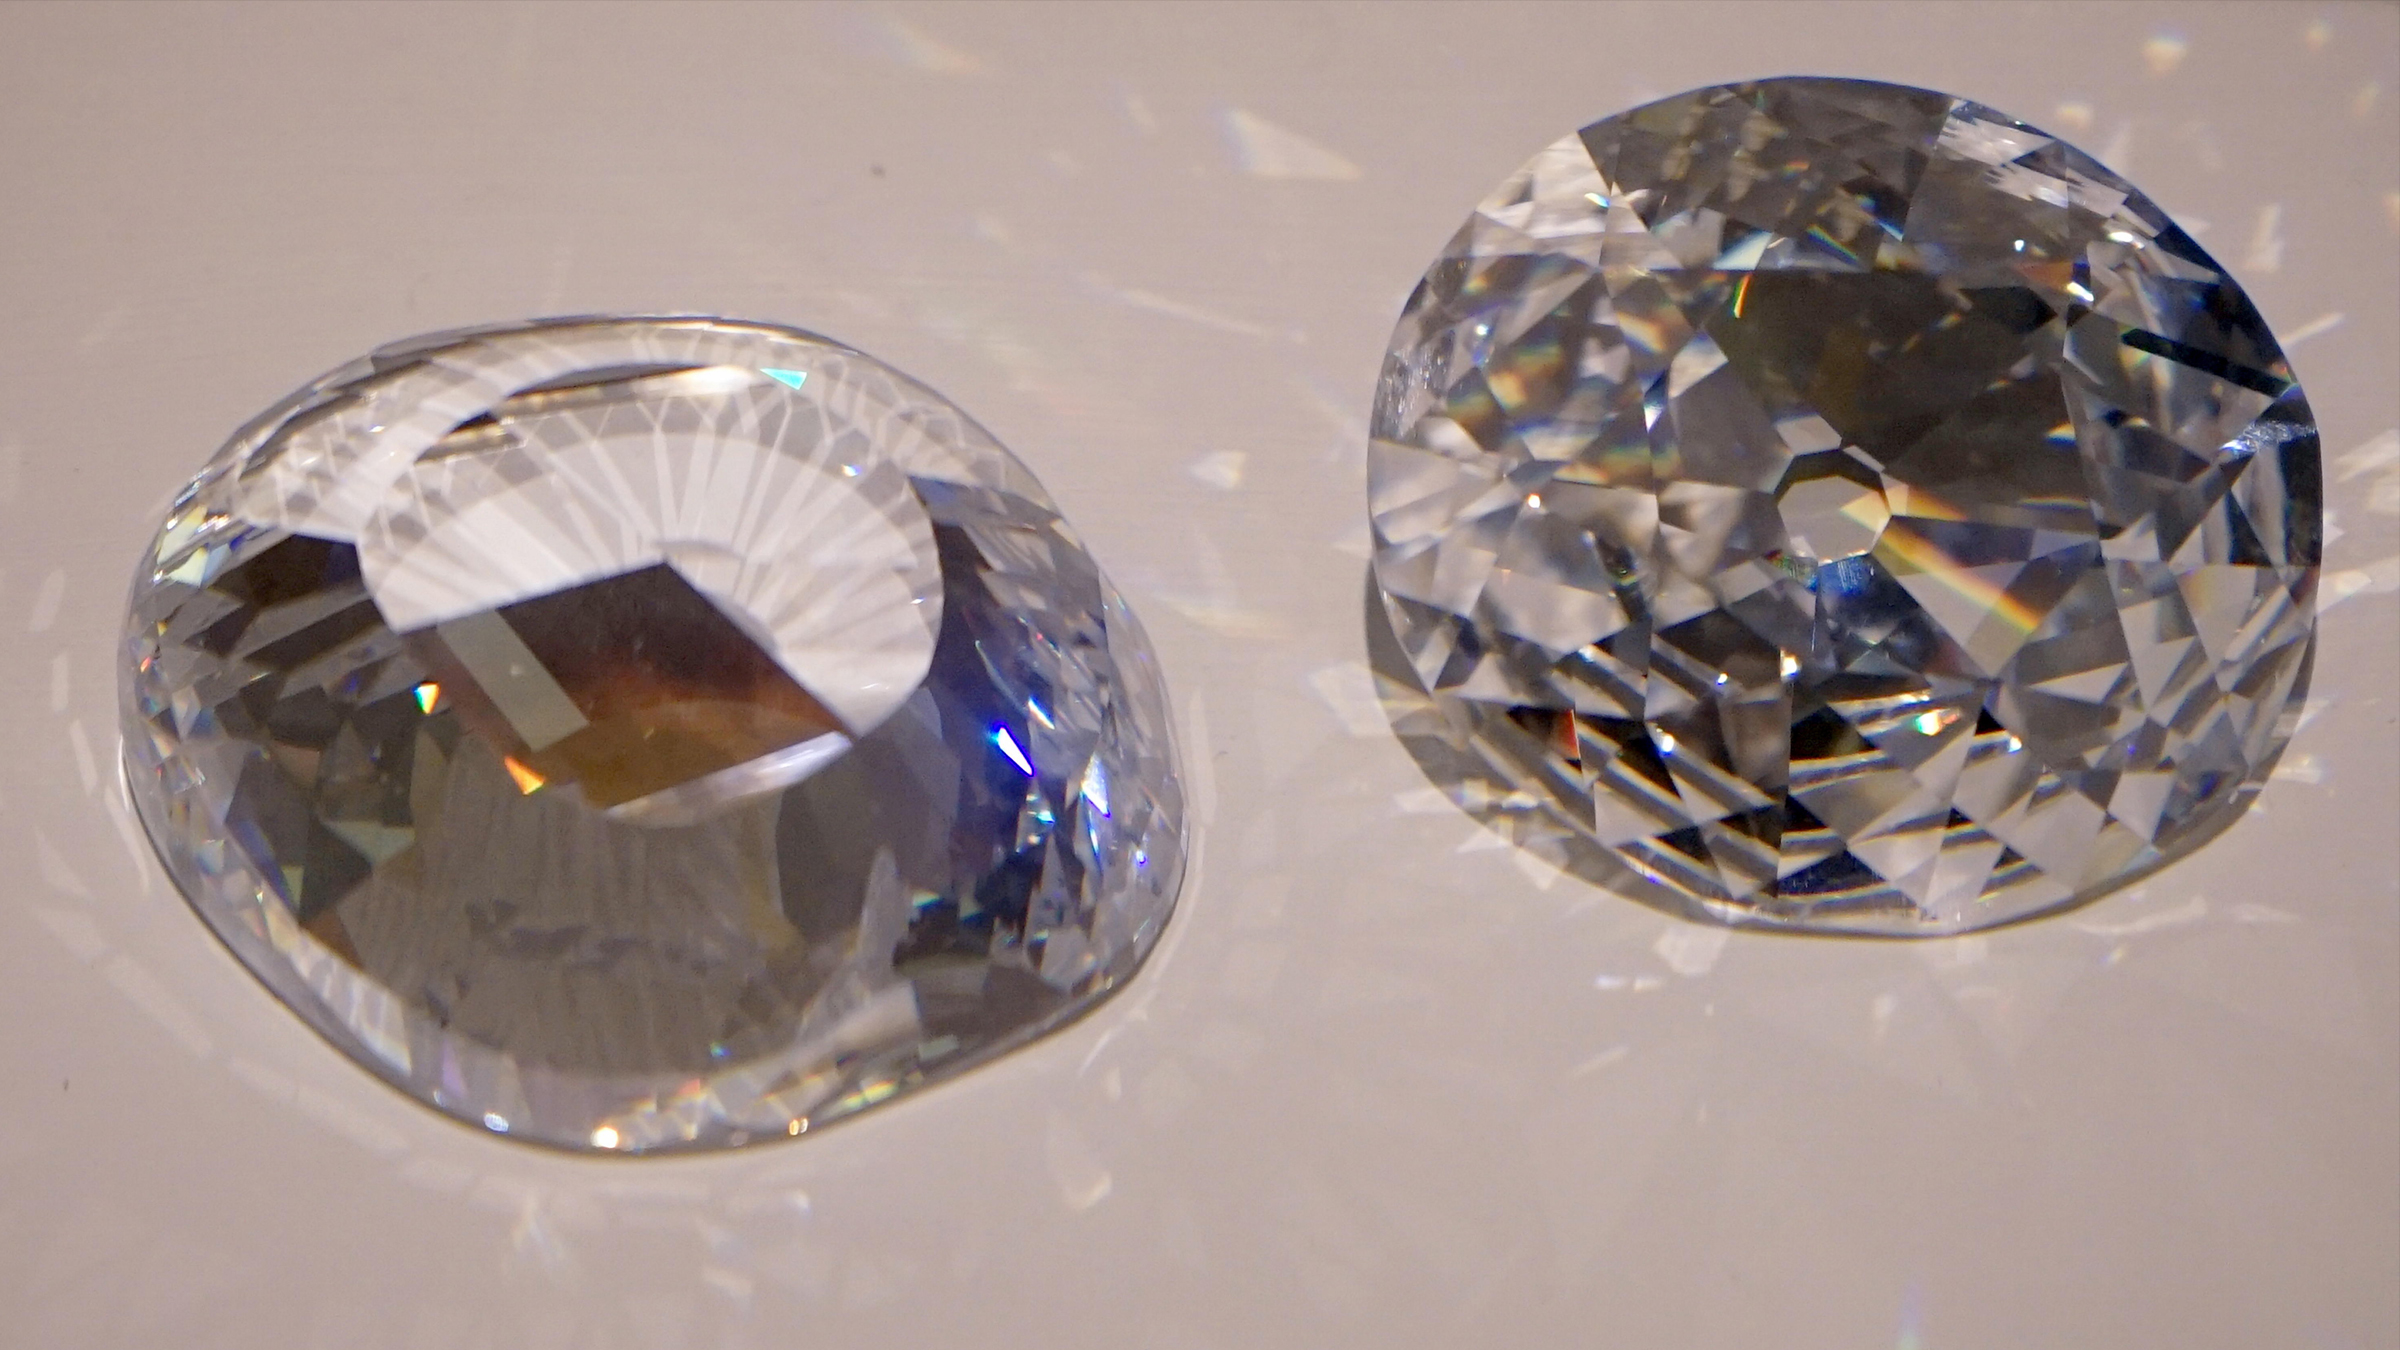 Two colorless diamonds, the Koh-i-Noor